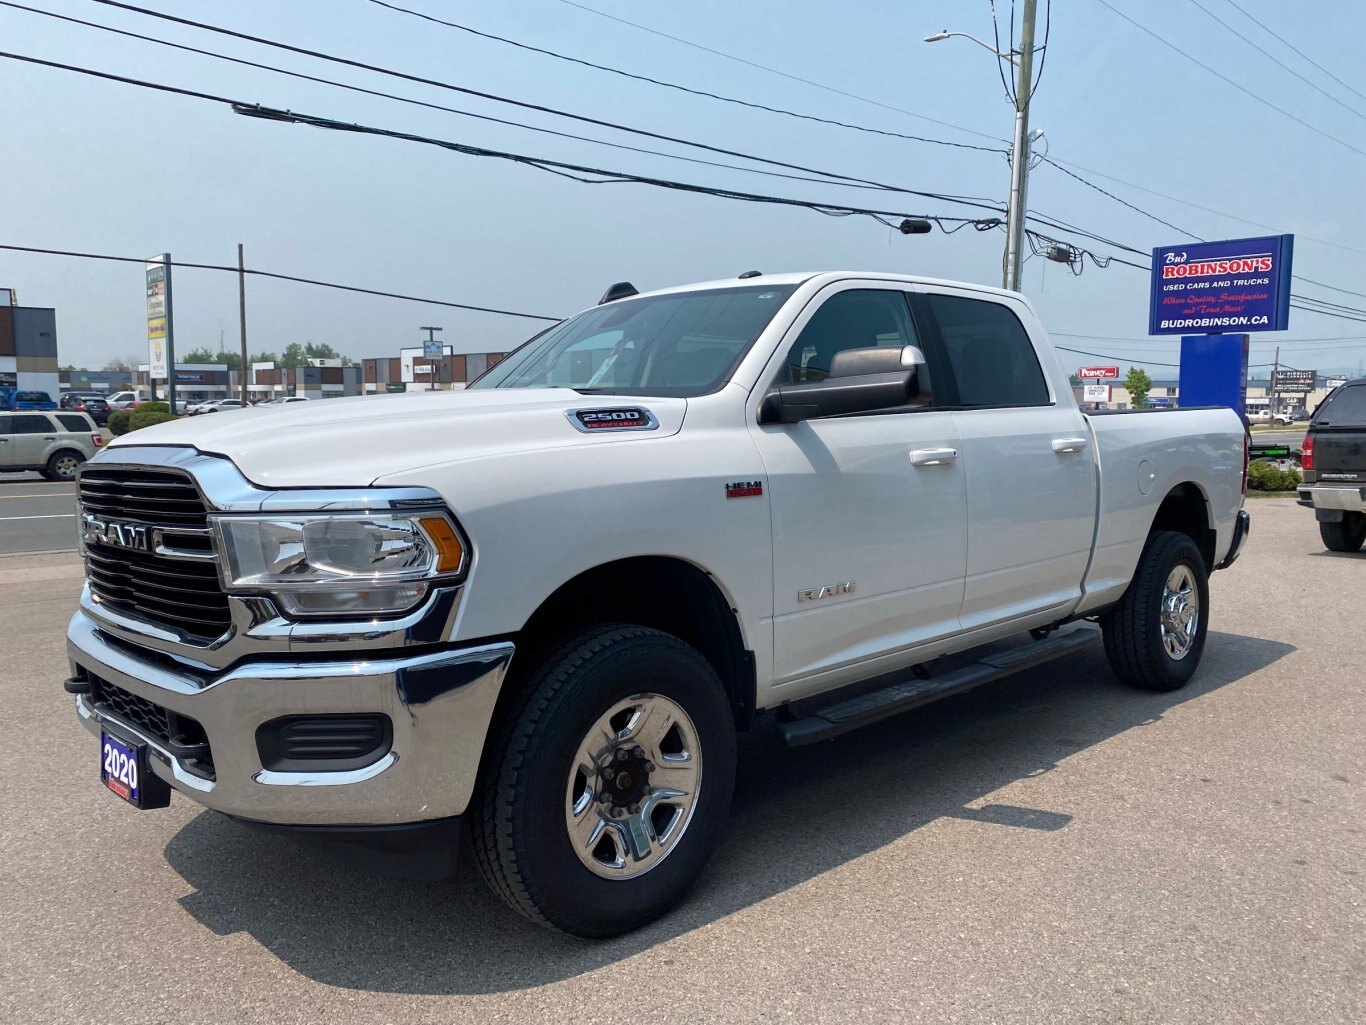 2020 DODGE RAM 2500 HD BIG HORN 4X4 CREW CAB WITH REAR VIEW CAMERA!!